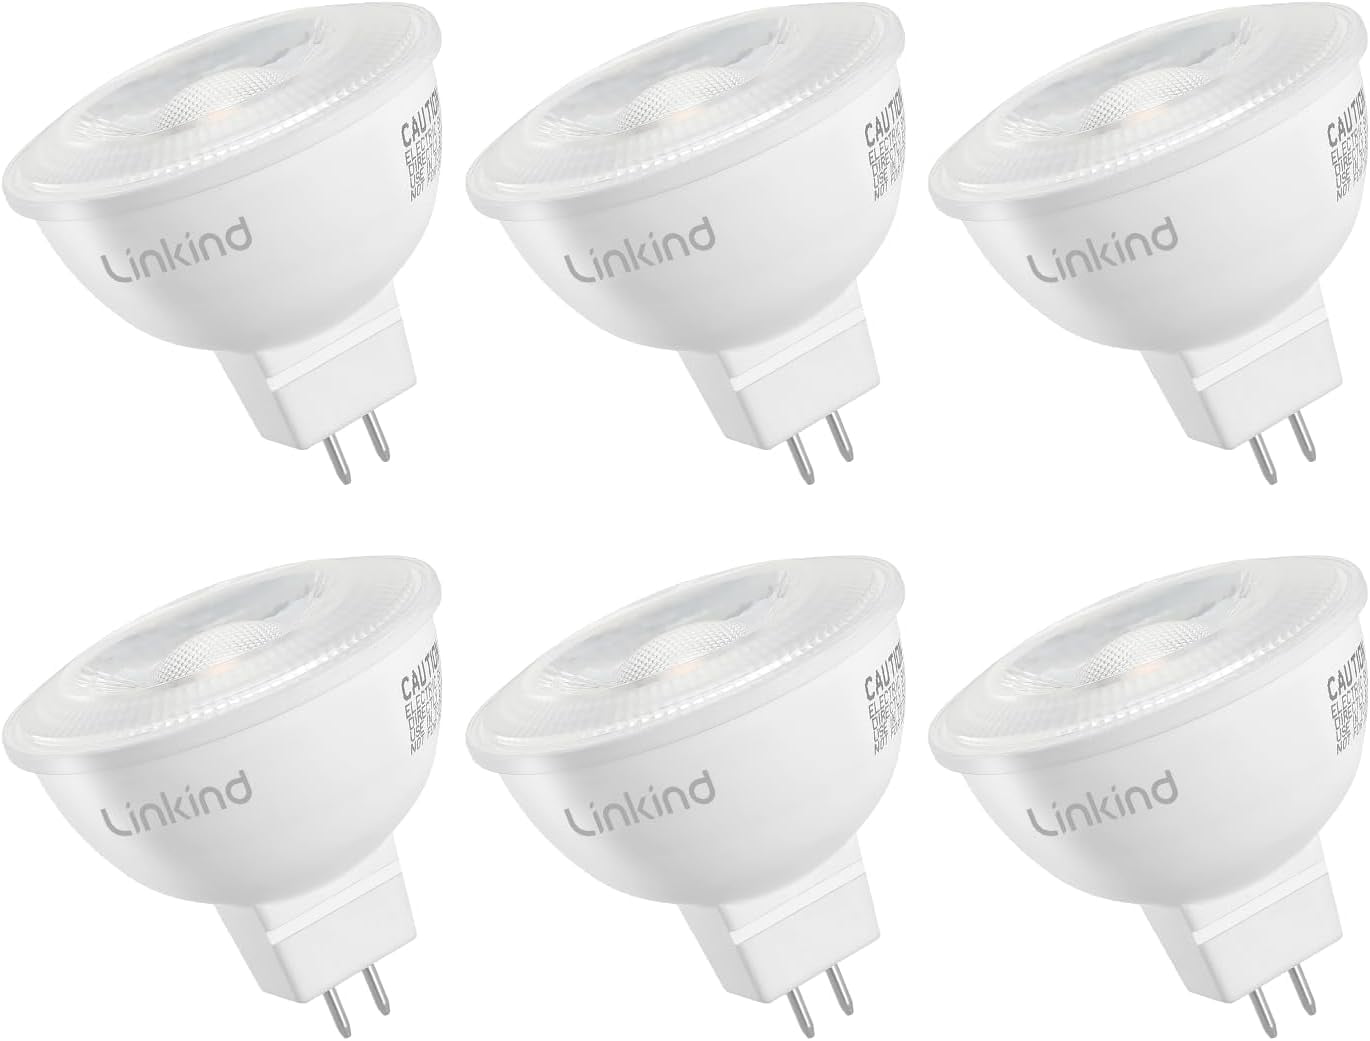 YBEK GU10 Halogen Light Bulbs 50W 120V MR16 Dimmable for  Track,Recessed,Accent Lighting,Ceiling Light,Scent Wax Burner,Warm  White(Pack of 6)